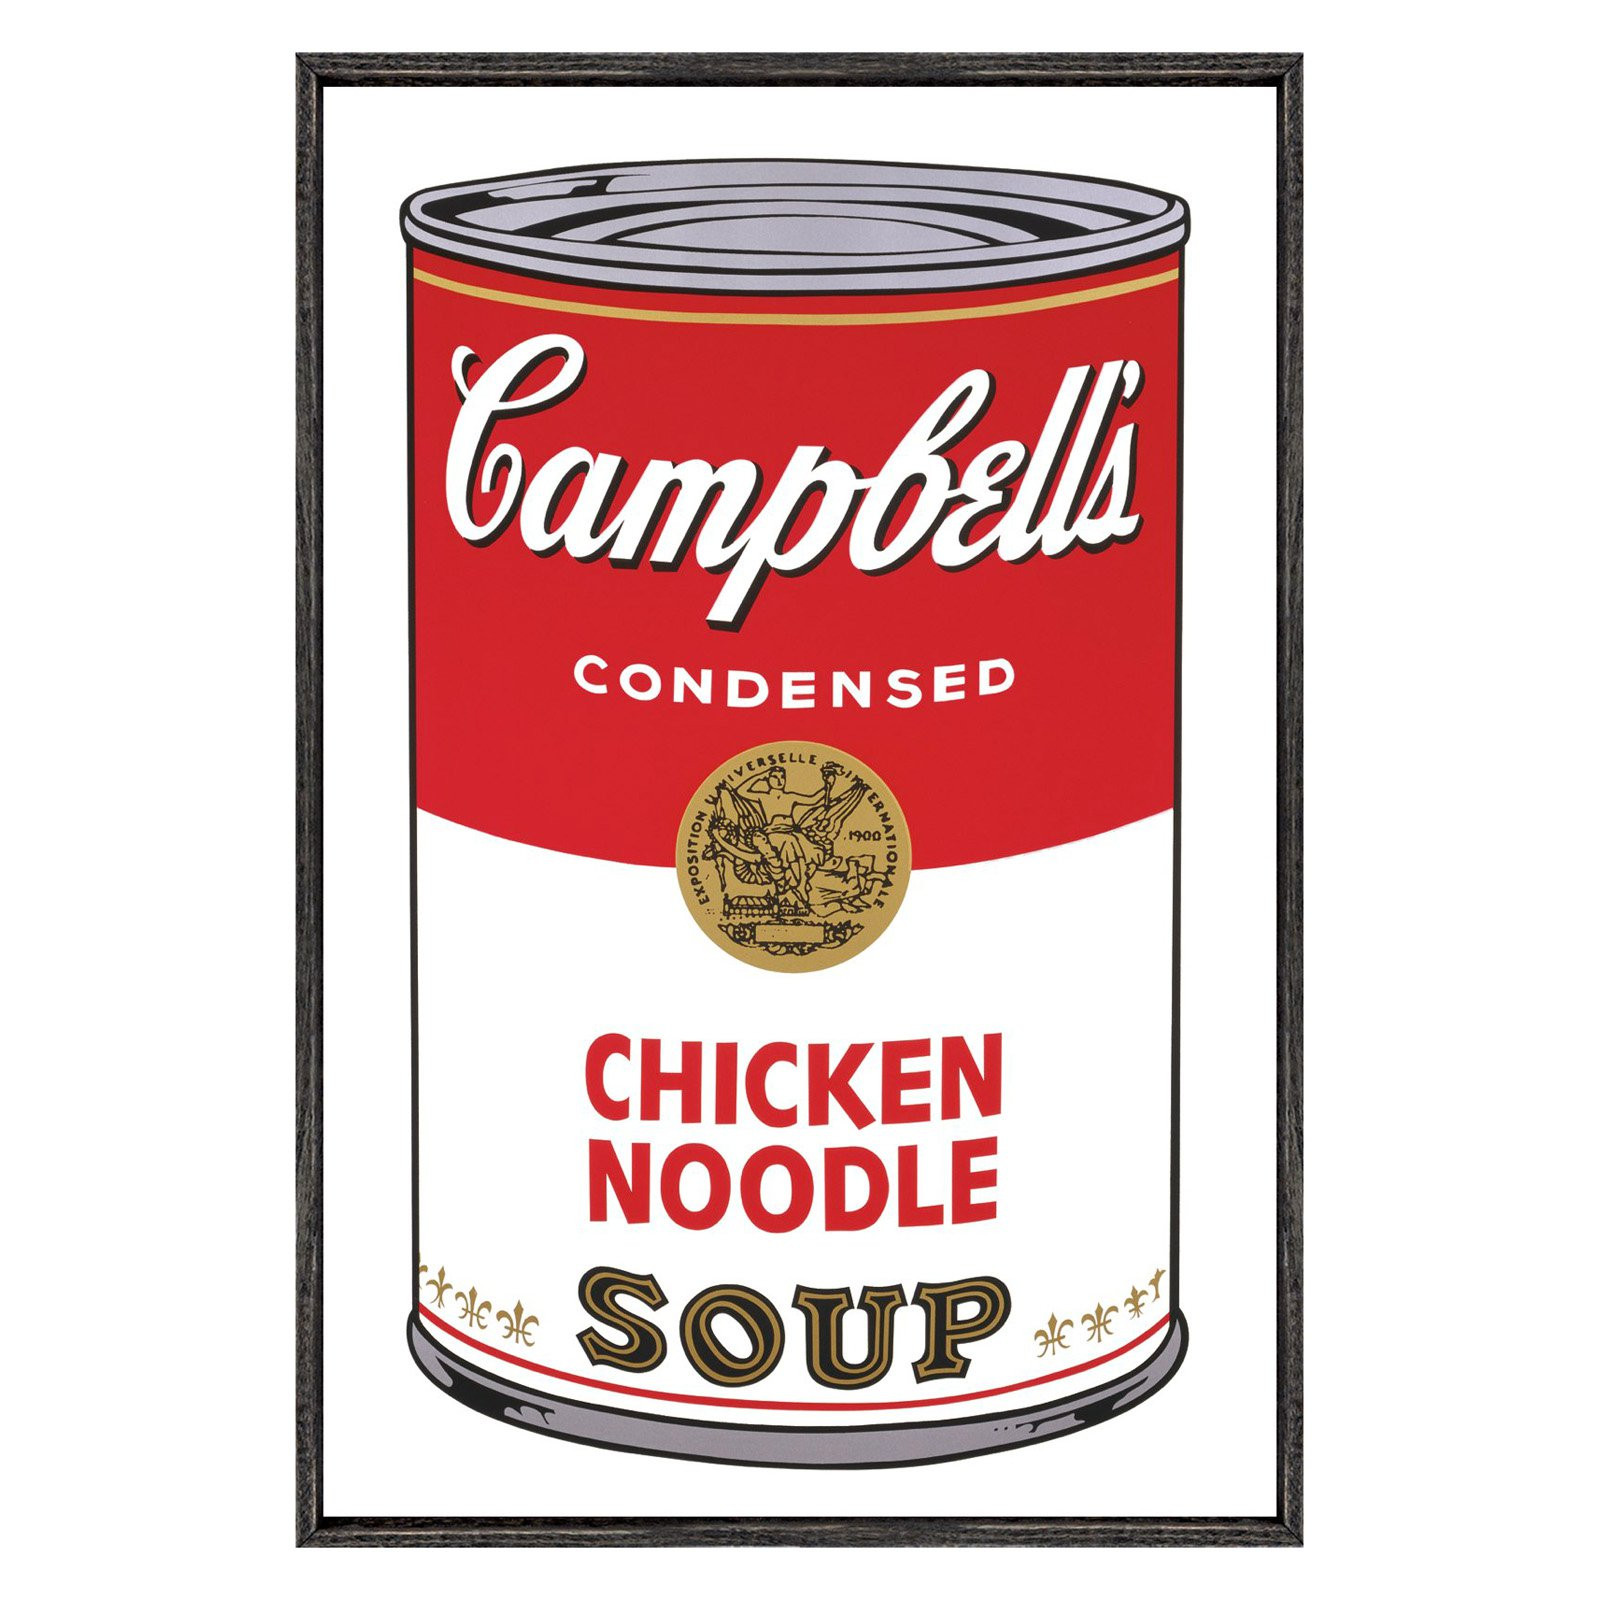 Campbells Chicken Noodle Soup
 Campbells Soup I Chicken Noodle 1968 18 x 12 in at